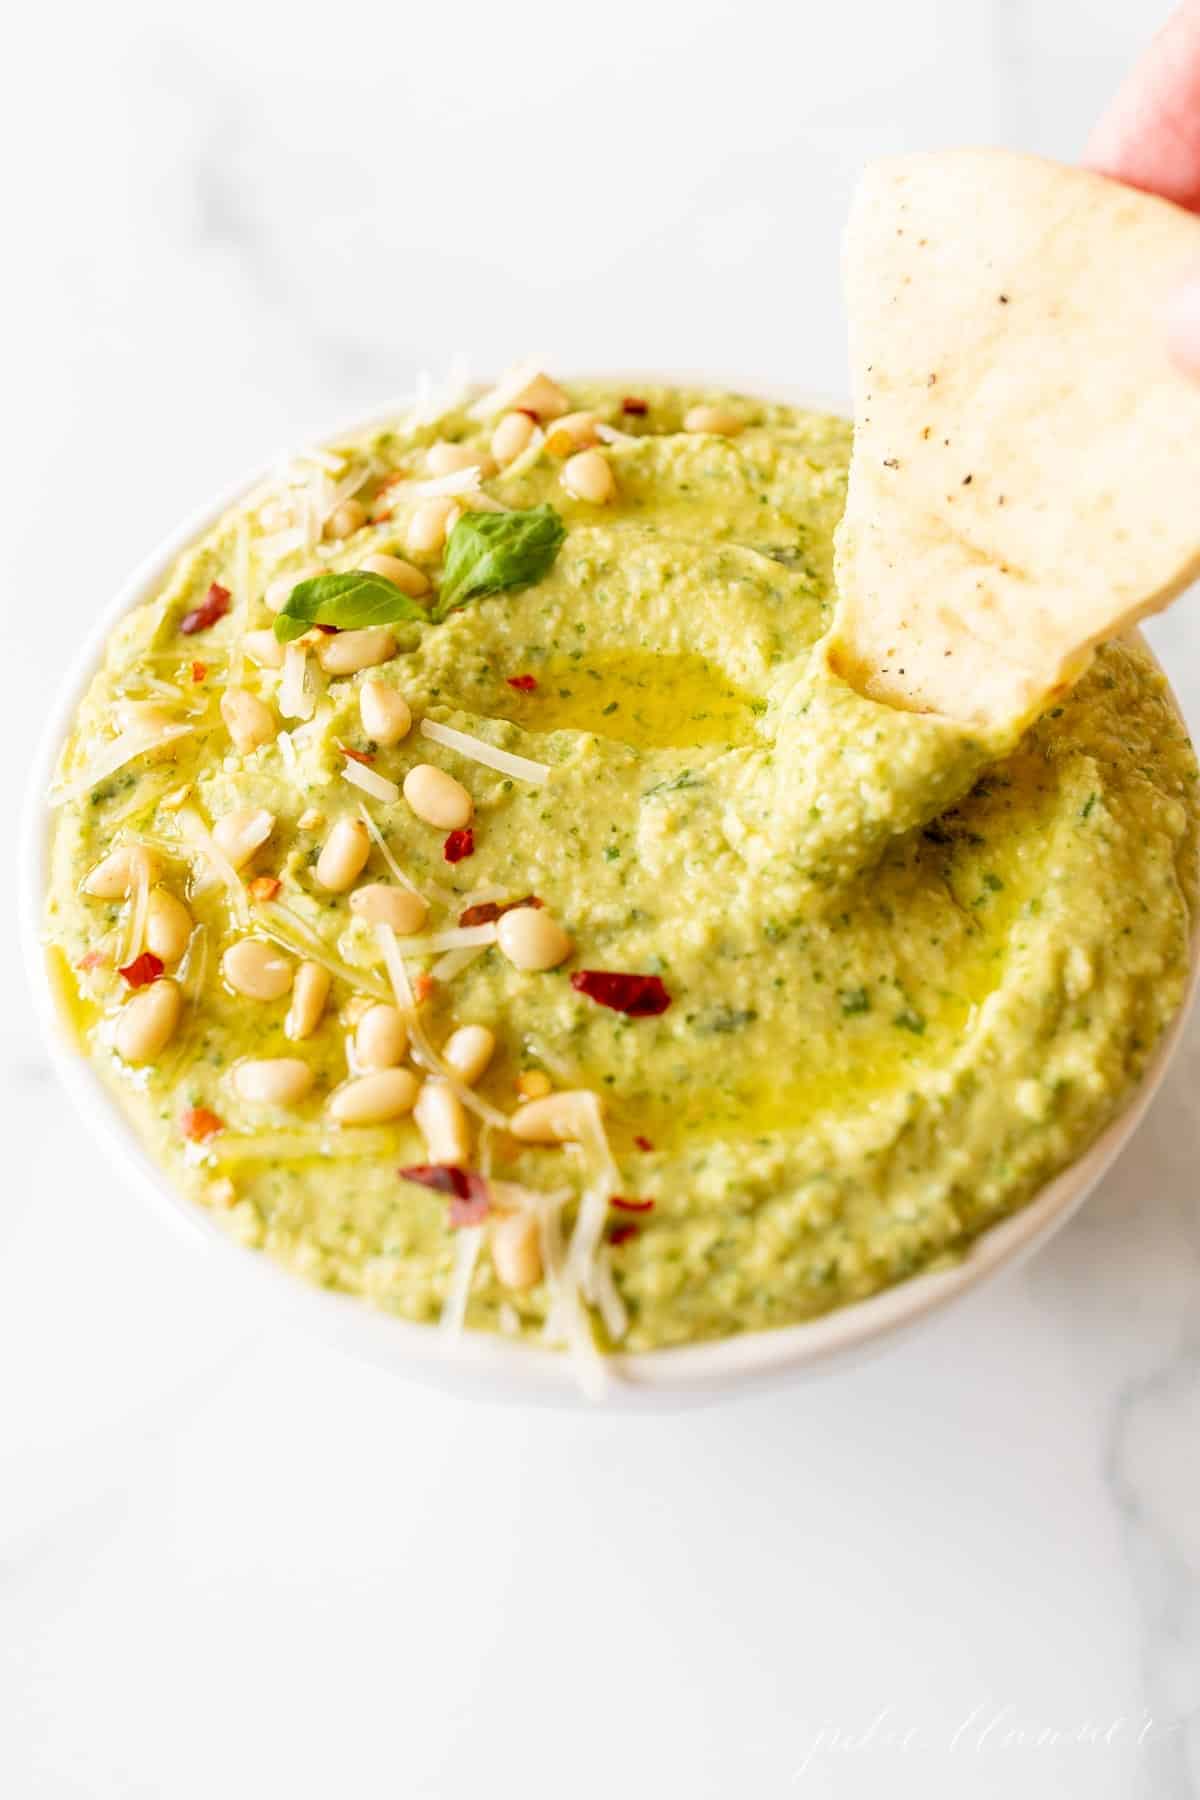 A bowl full of basil hummus on a marble surface, hand reaching in with a pita triangle.